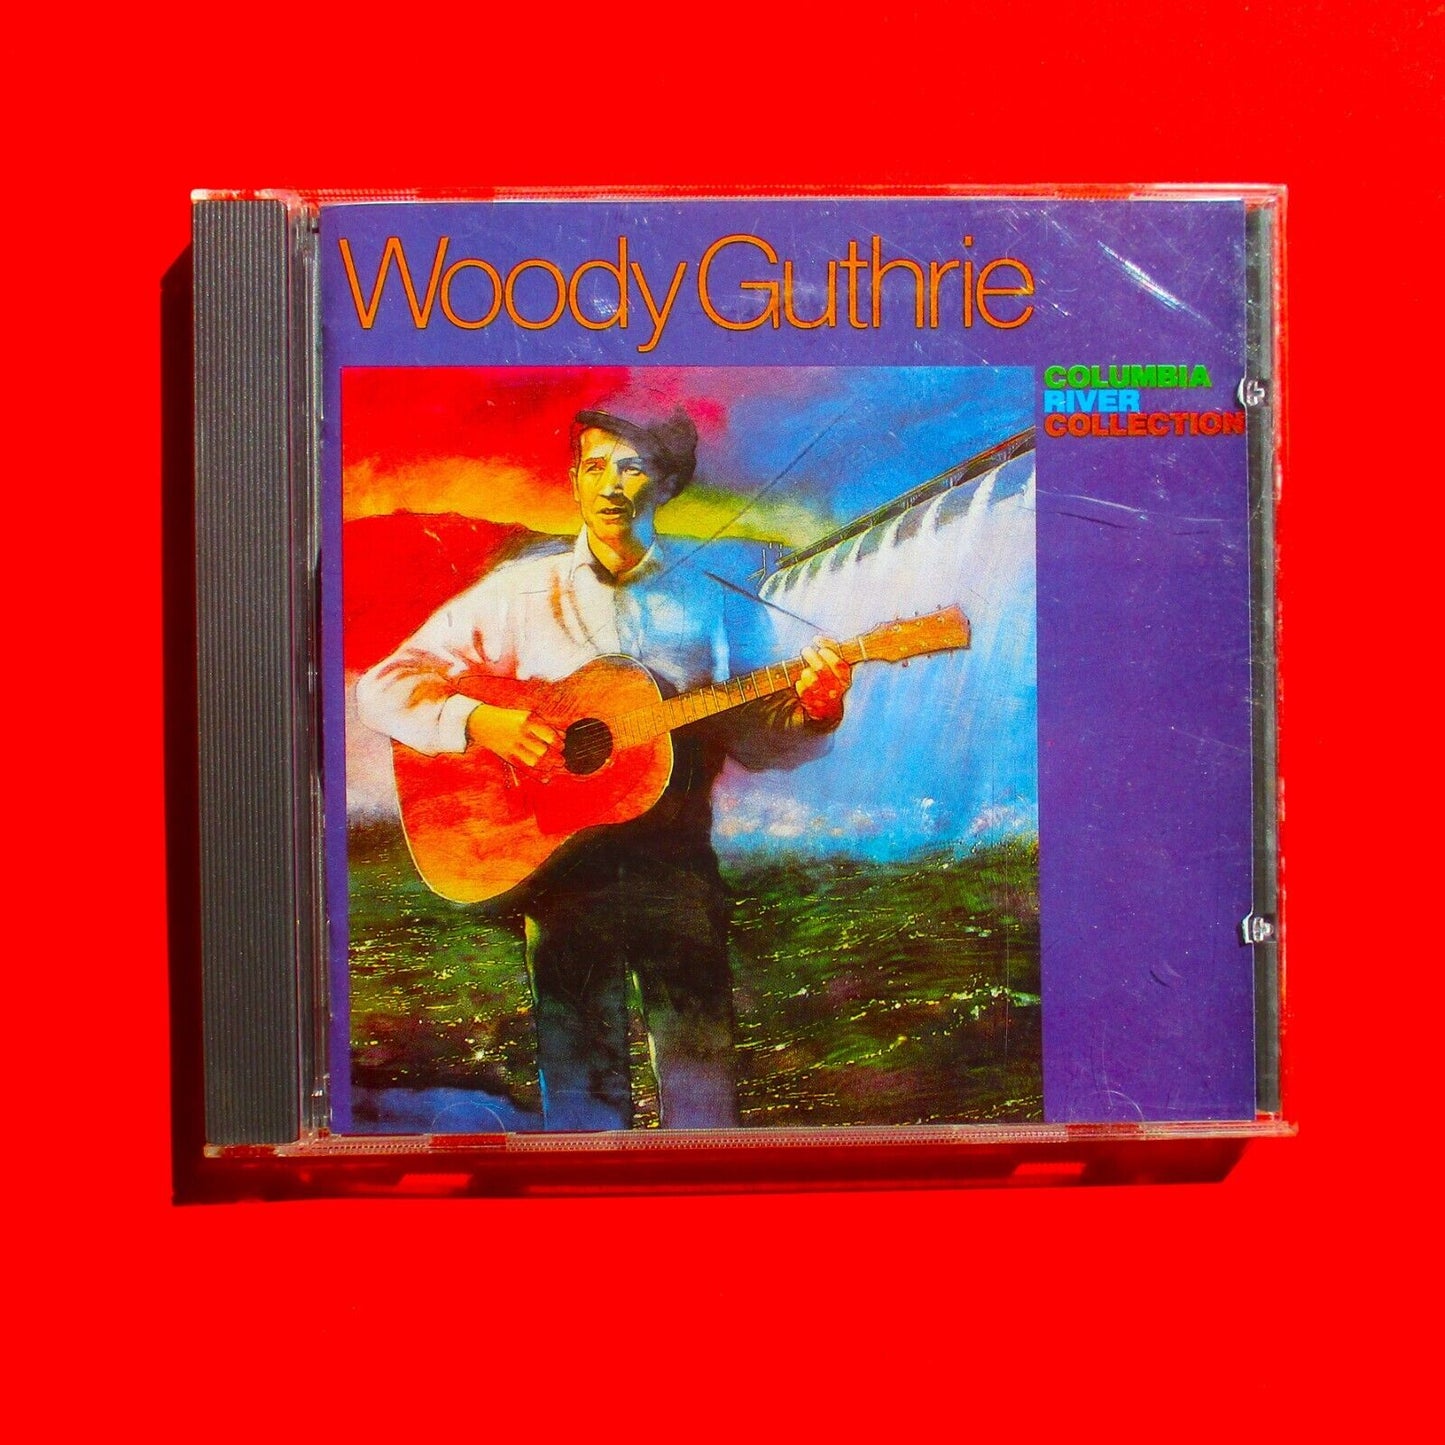 Woody Guthrie Columbia River Collection CD Compilation Album (Rounder Records)